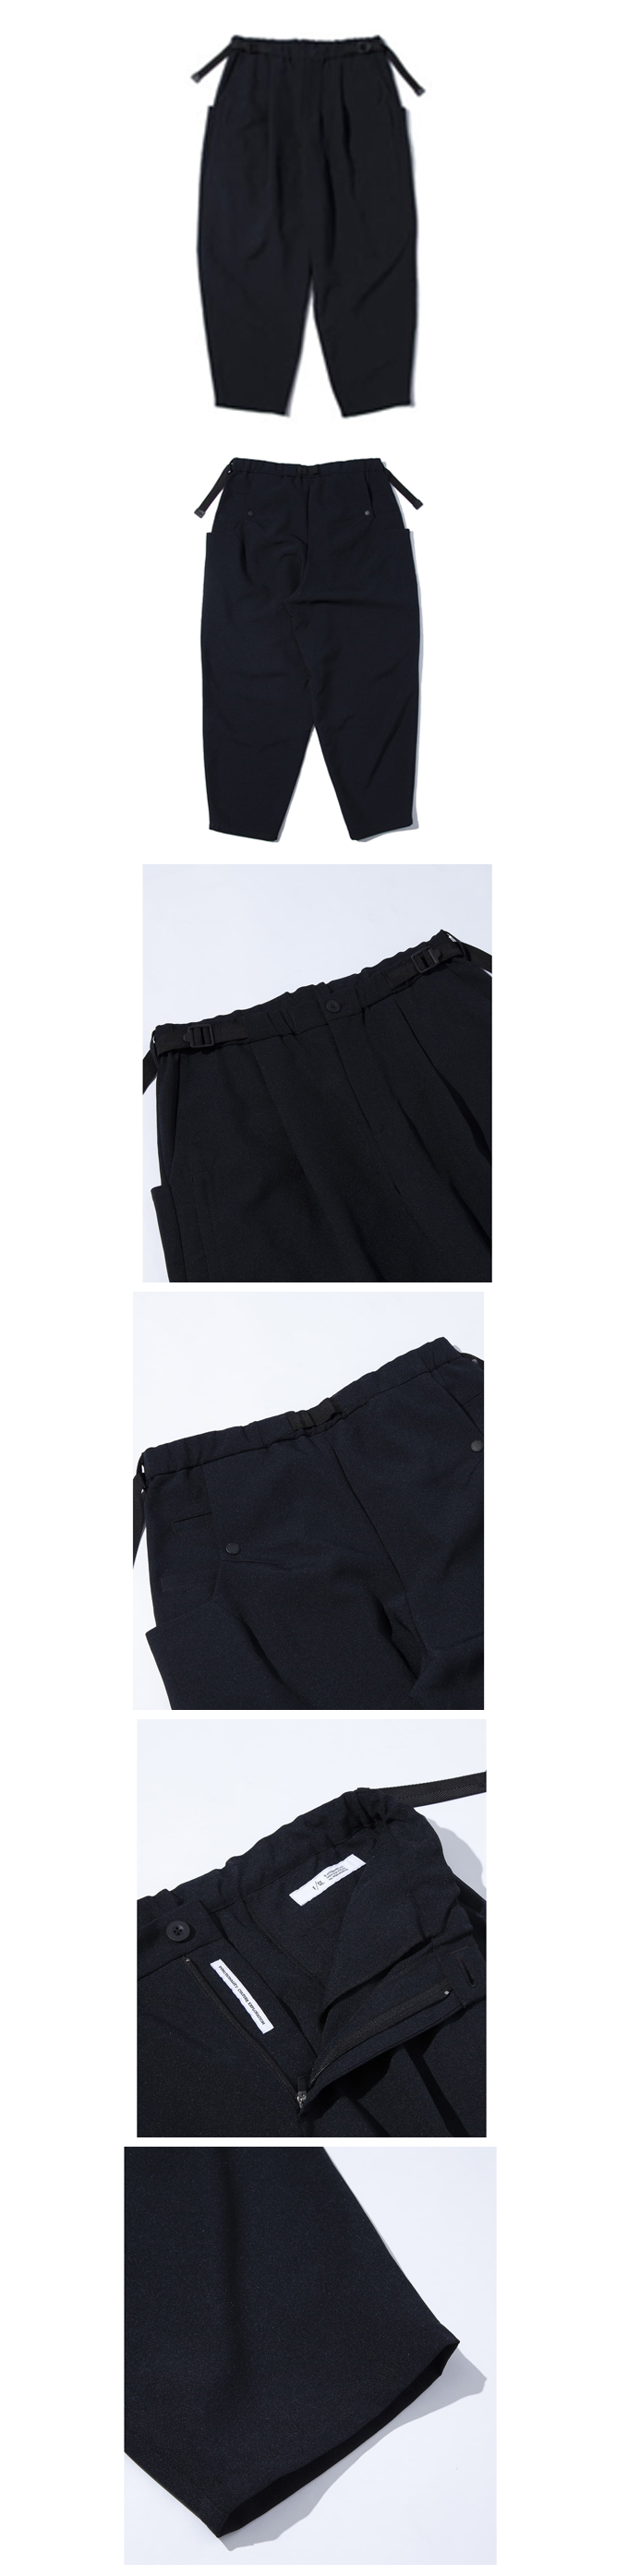 F/CE LIGHTWEIGHT BALLOON CROPPED PANTS